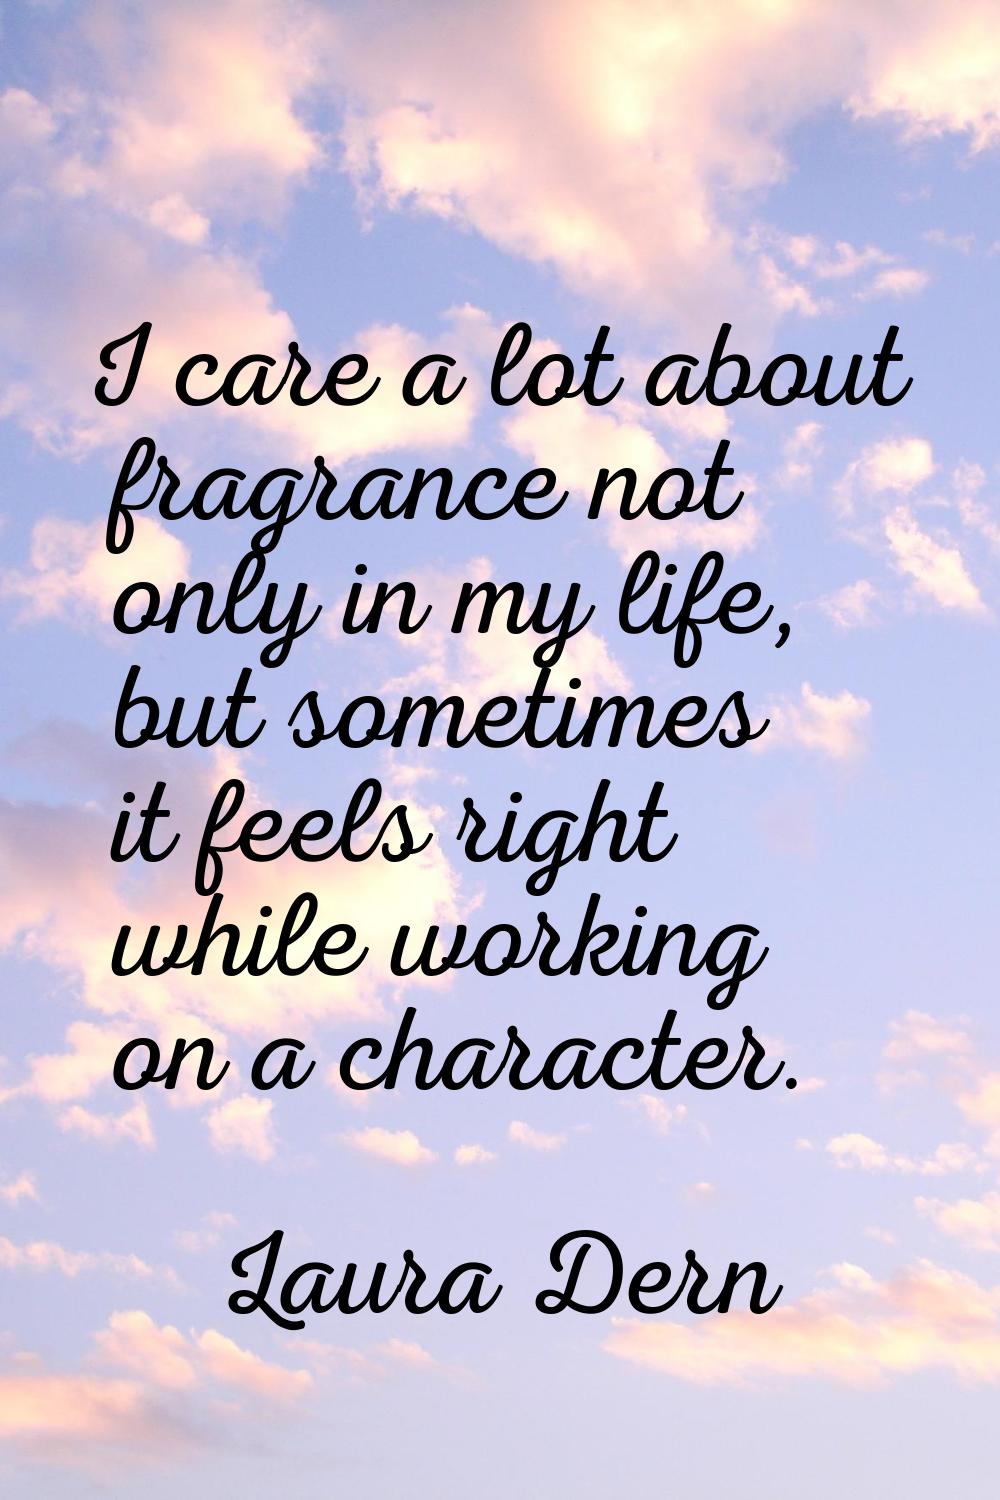 I care a lot about fragrance not only in my life, but sometimes it feels right while working on a c